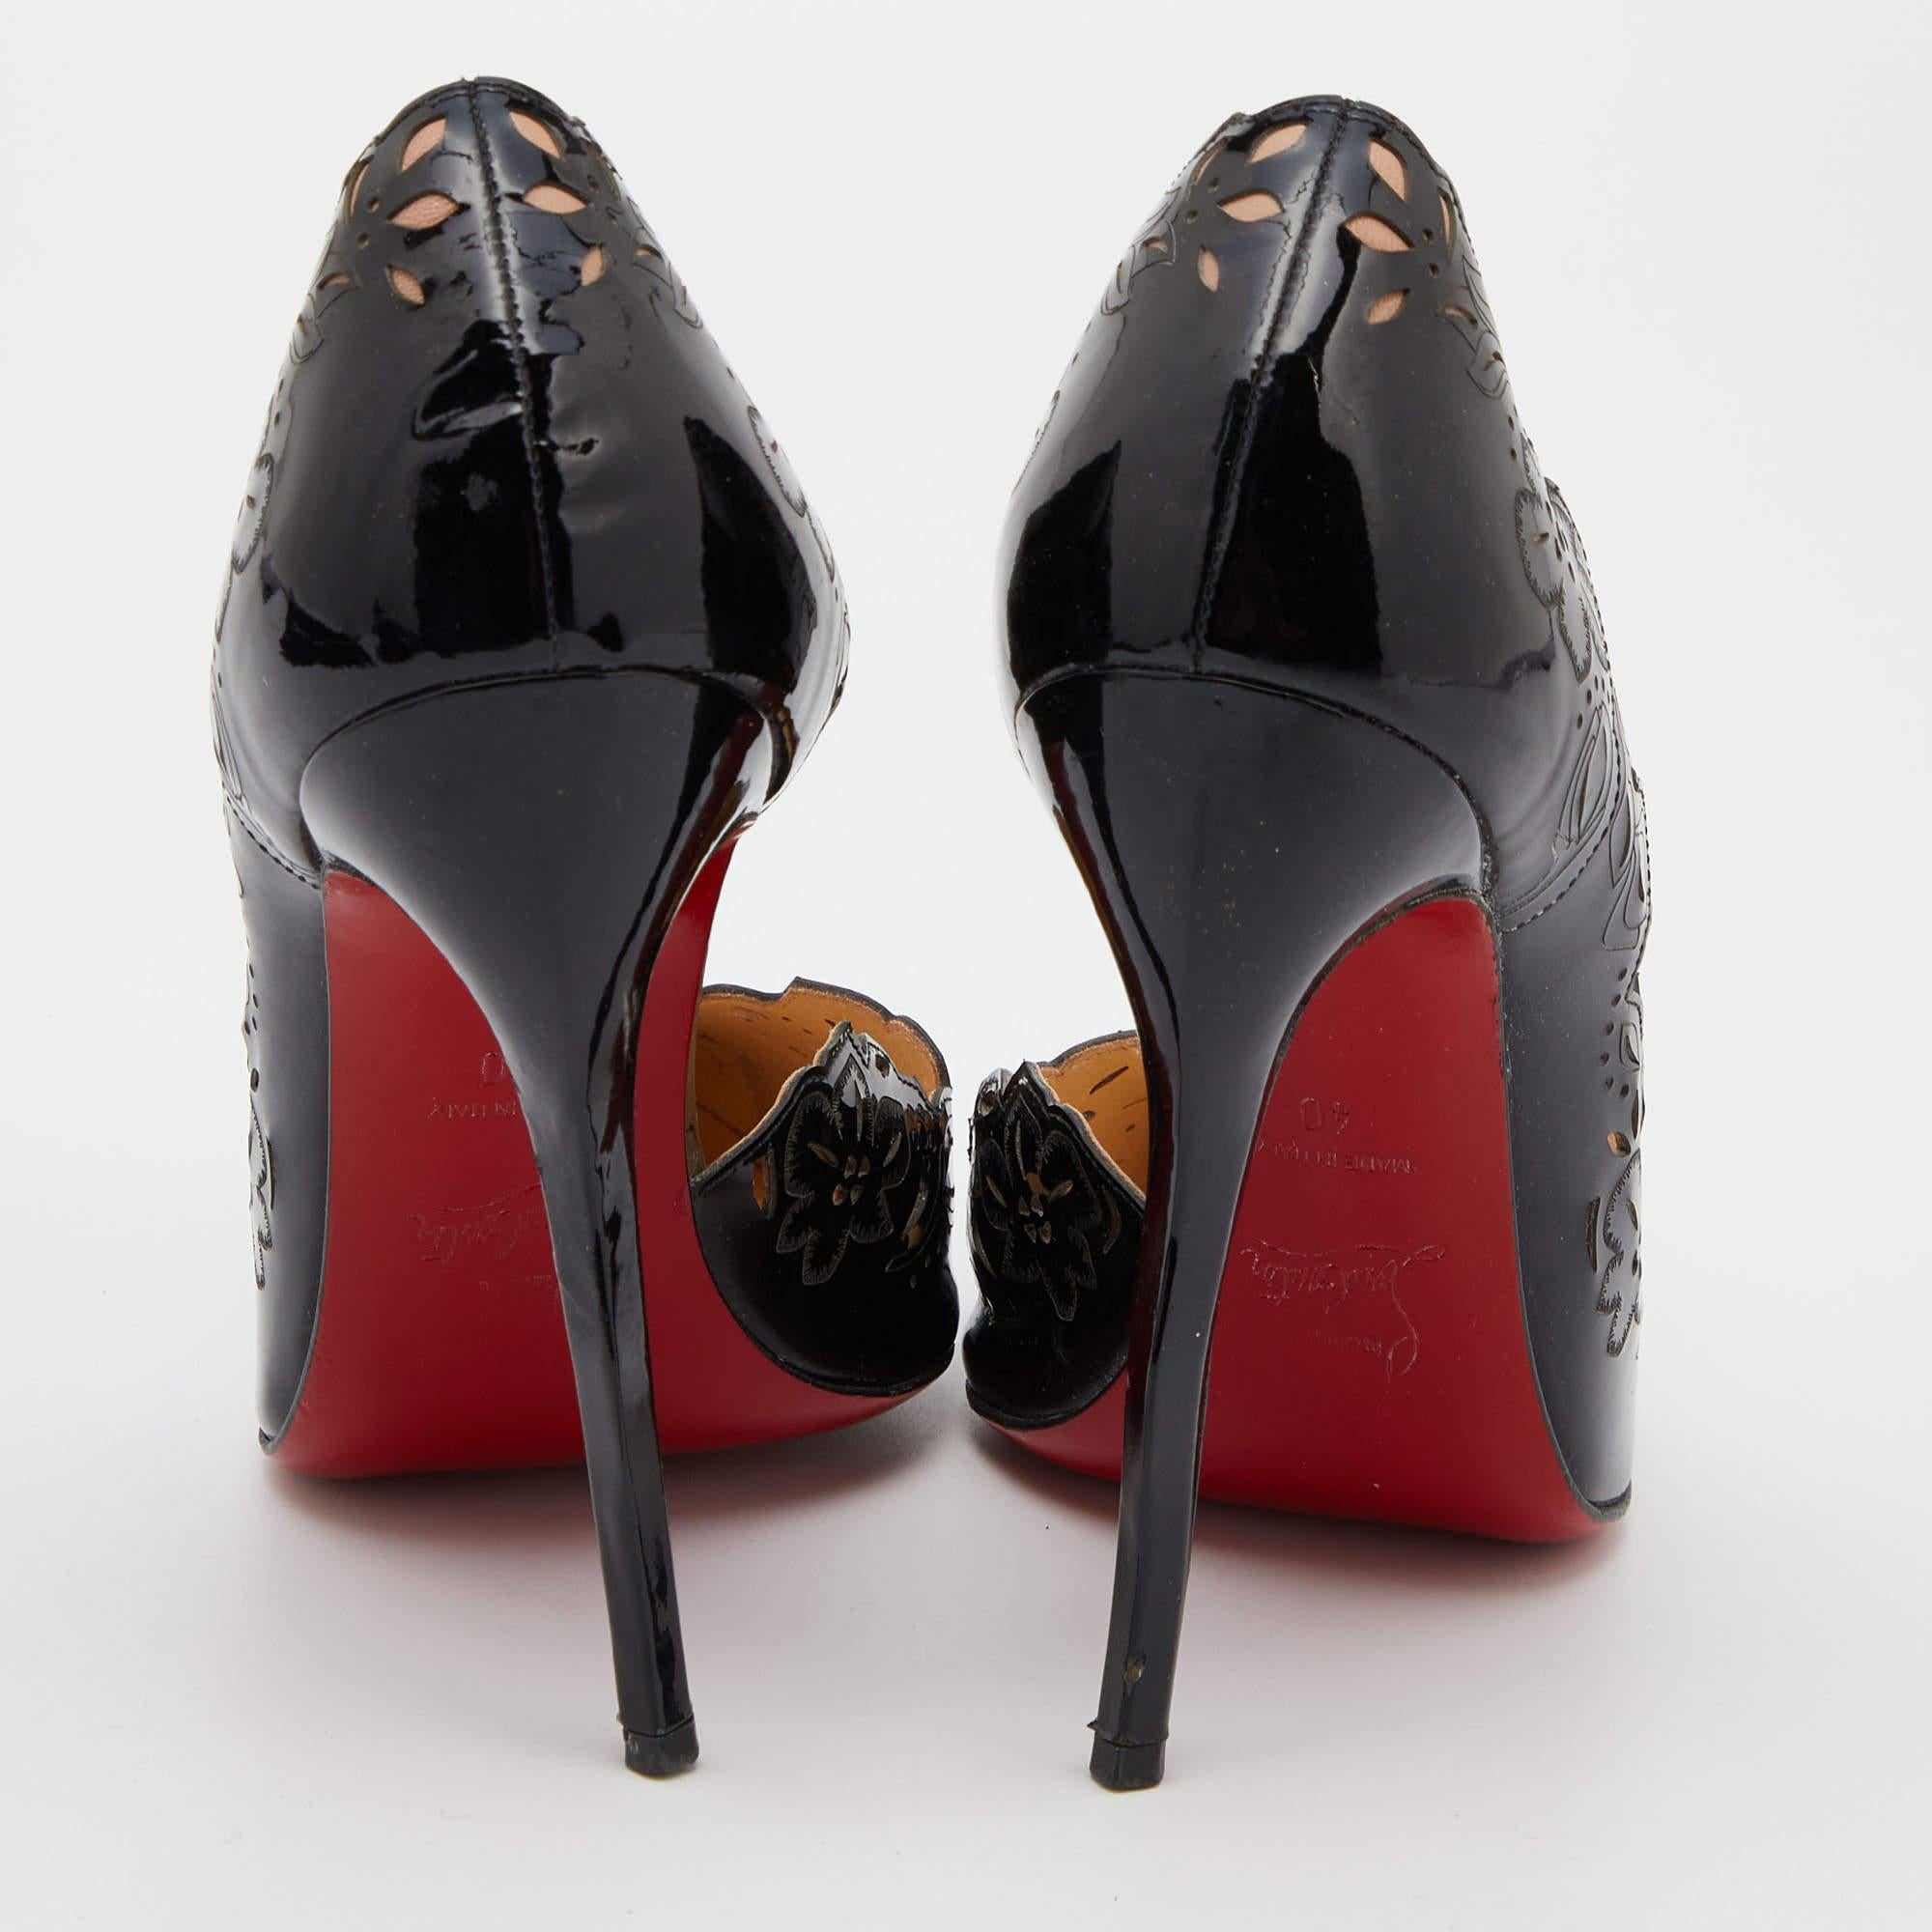 Christian Louboutin Black Patent Leather Beloved Pumps Size 40 In Good Condition For Sale In Dubai, Al Qouz 2